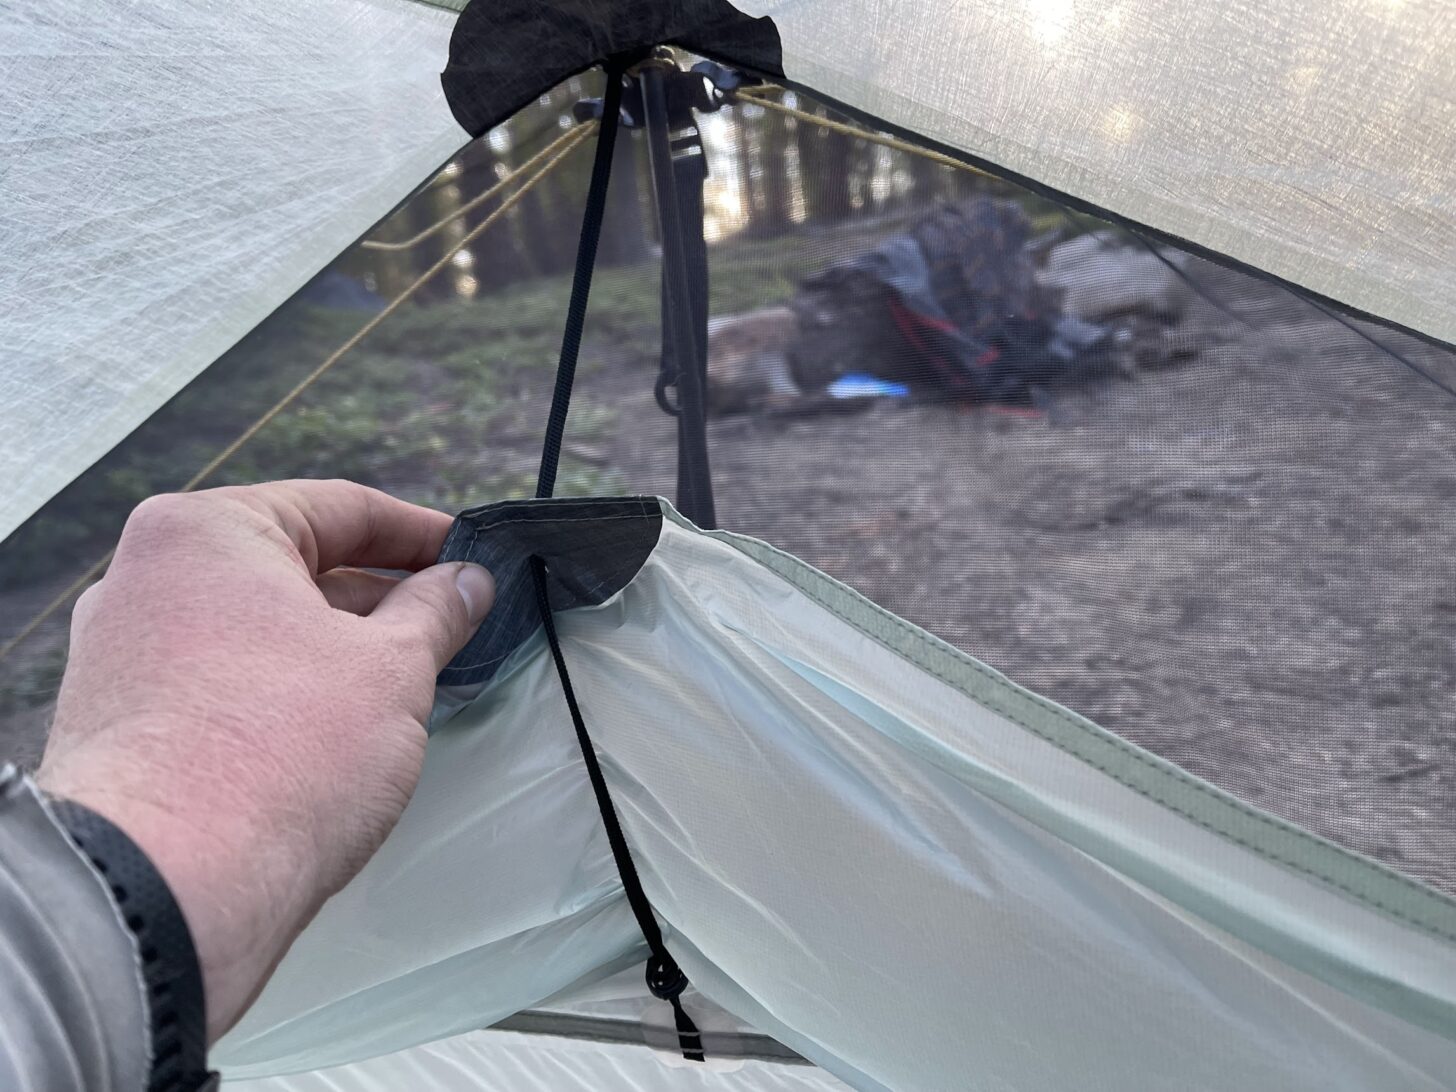 A hand pulls down the vent cover from the inside of the tent